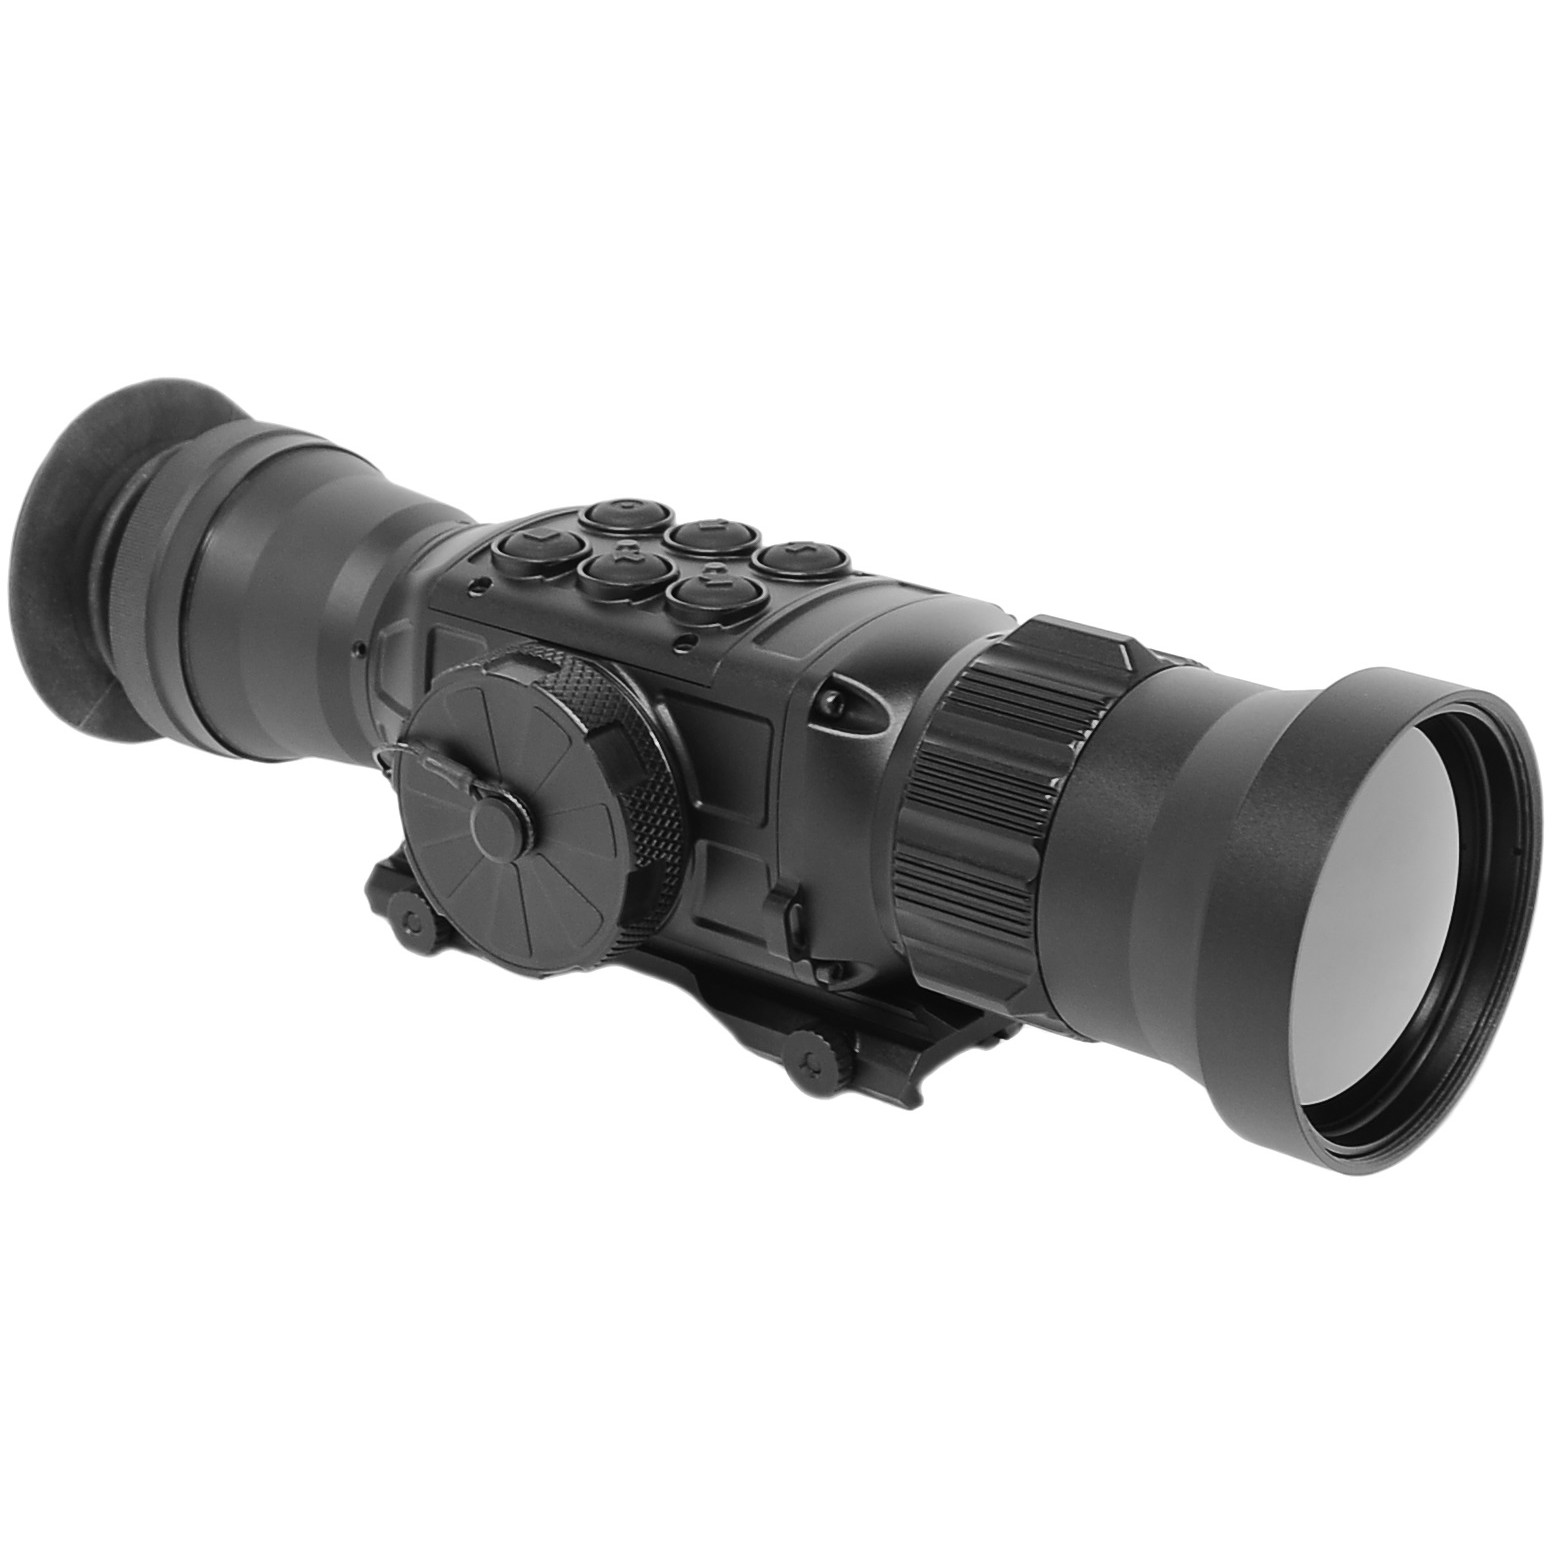 GSCI TCS Supreme-Grade Thermal Clip-On Scope